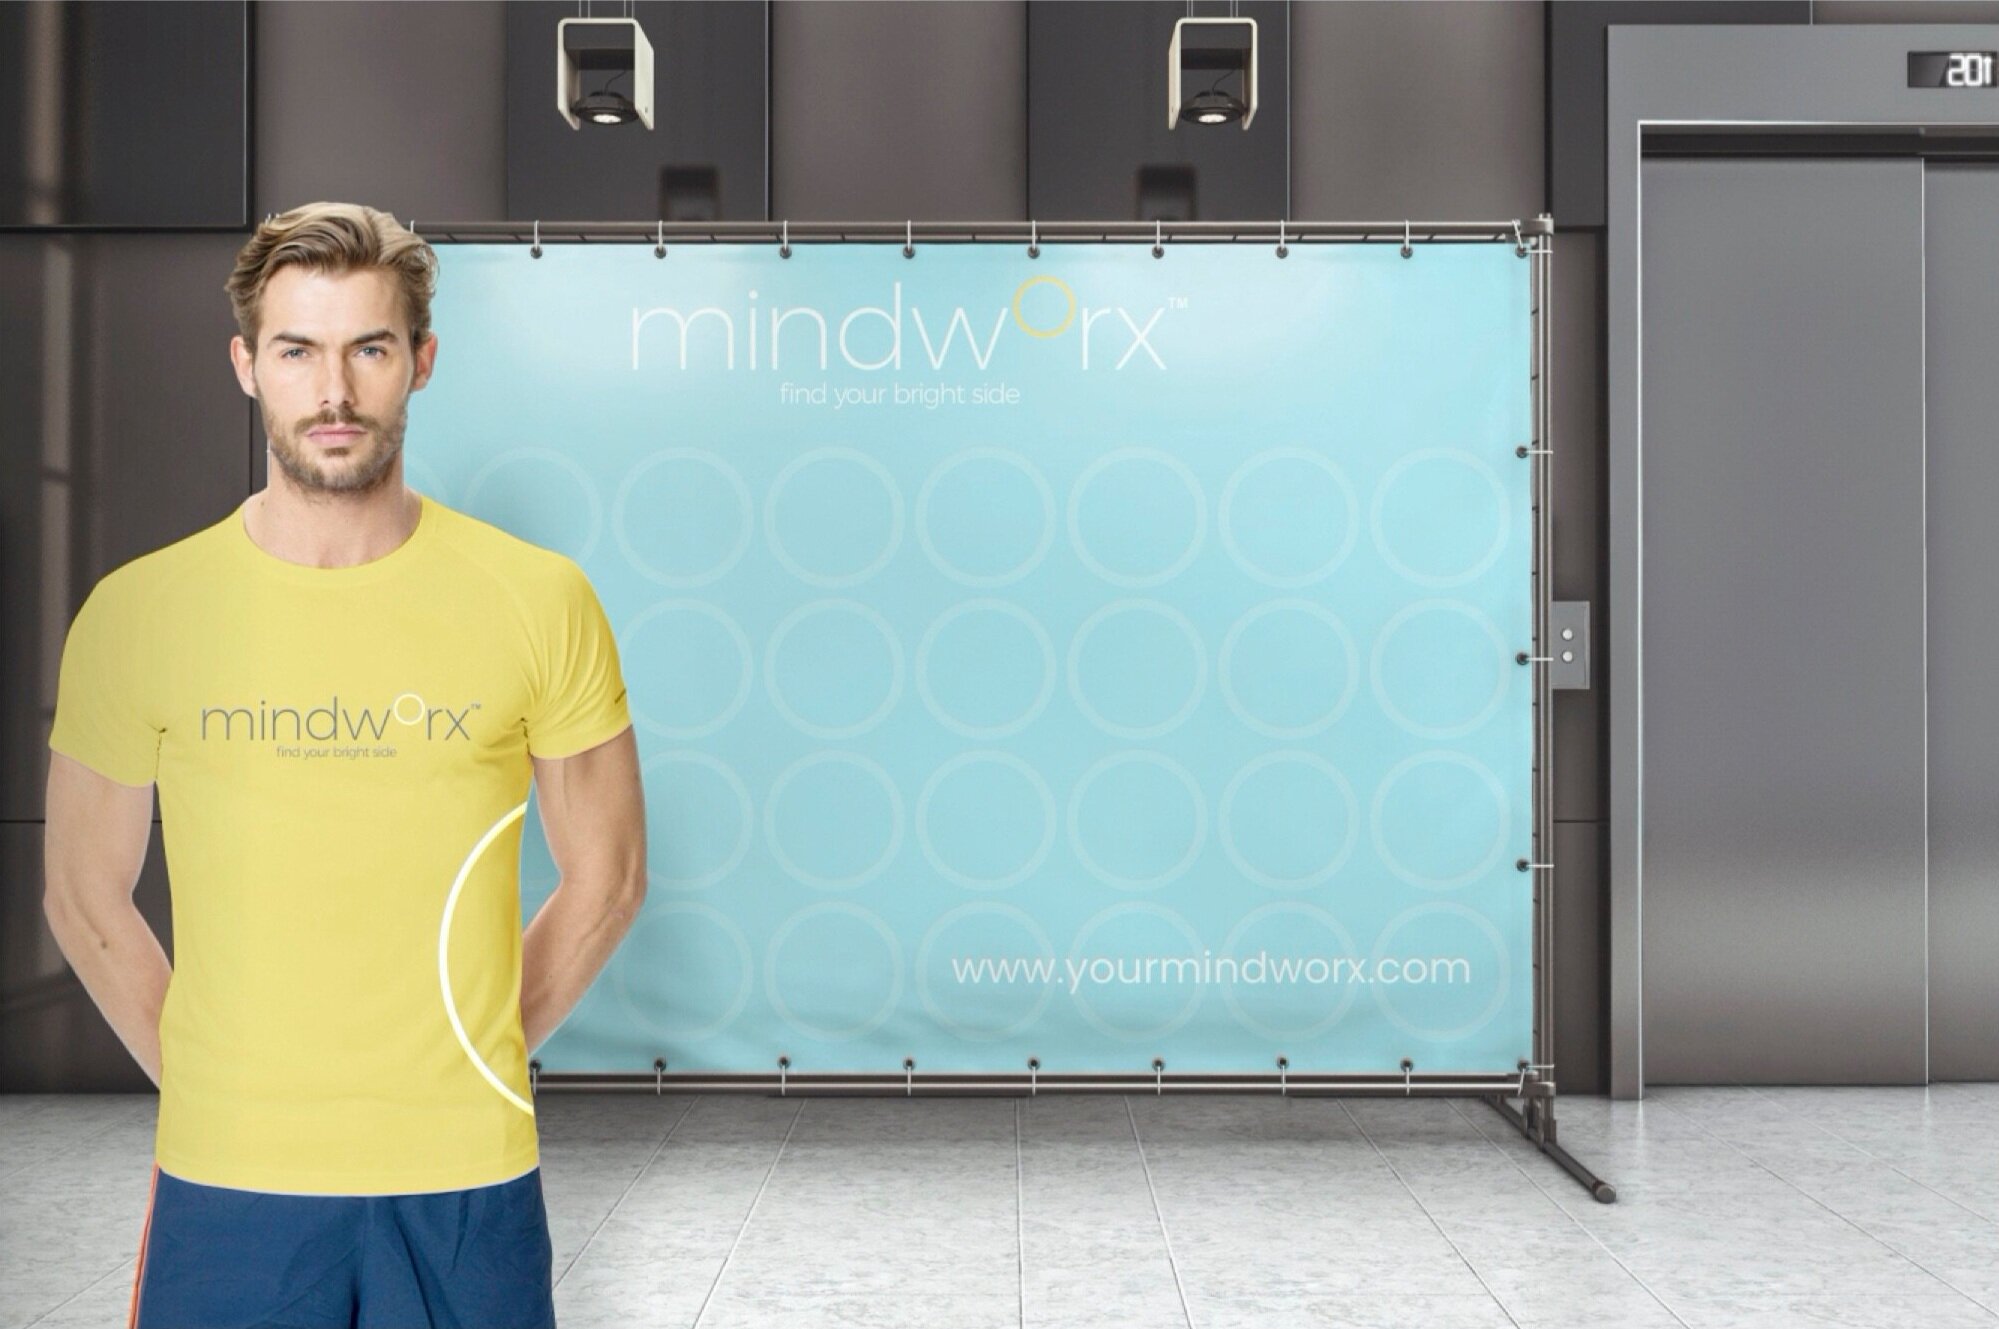 MINDWORX+-+STEP+AND+REPEAT+BANNER+%28dragged%29.jpg